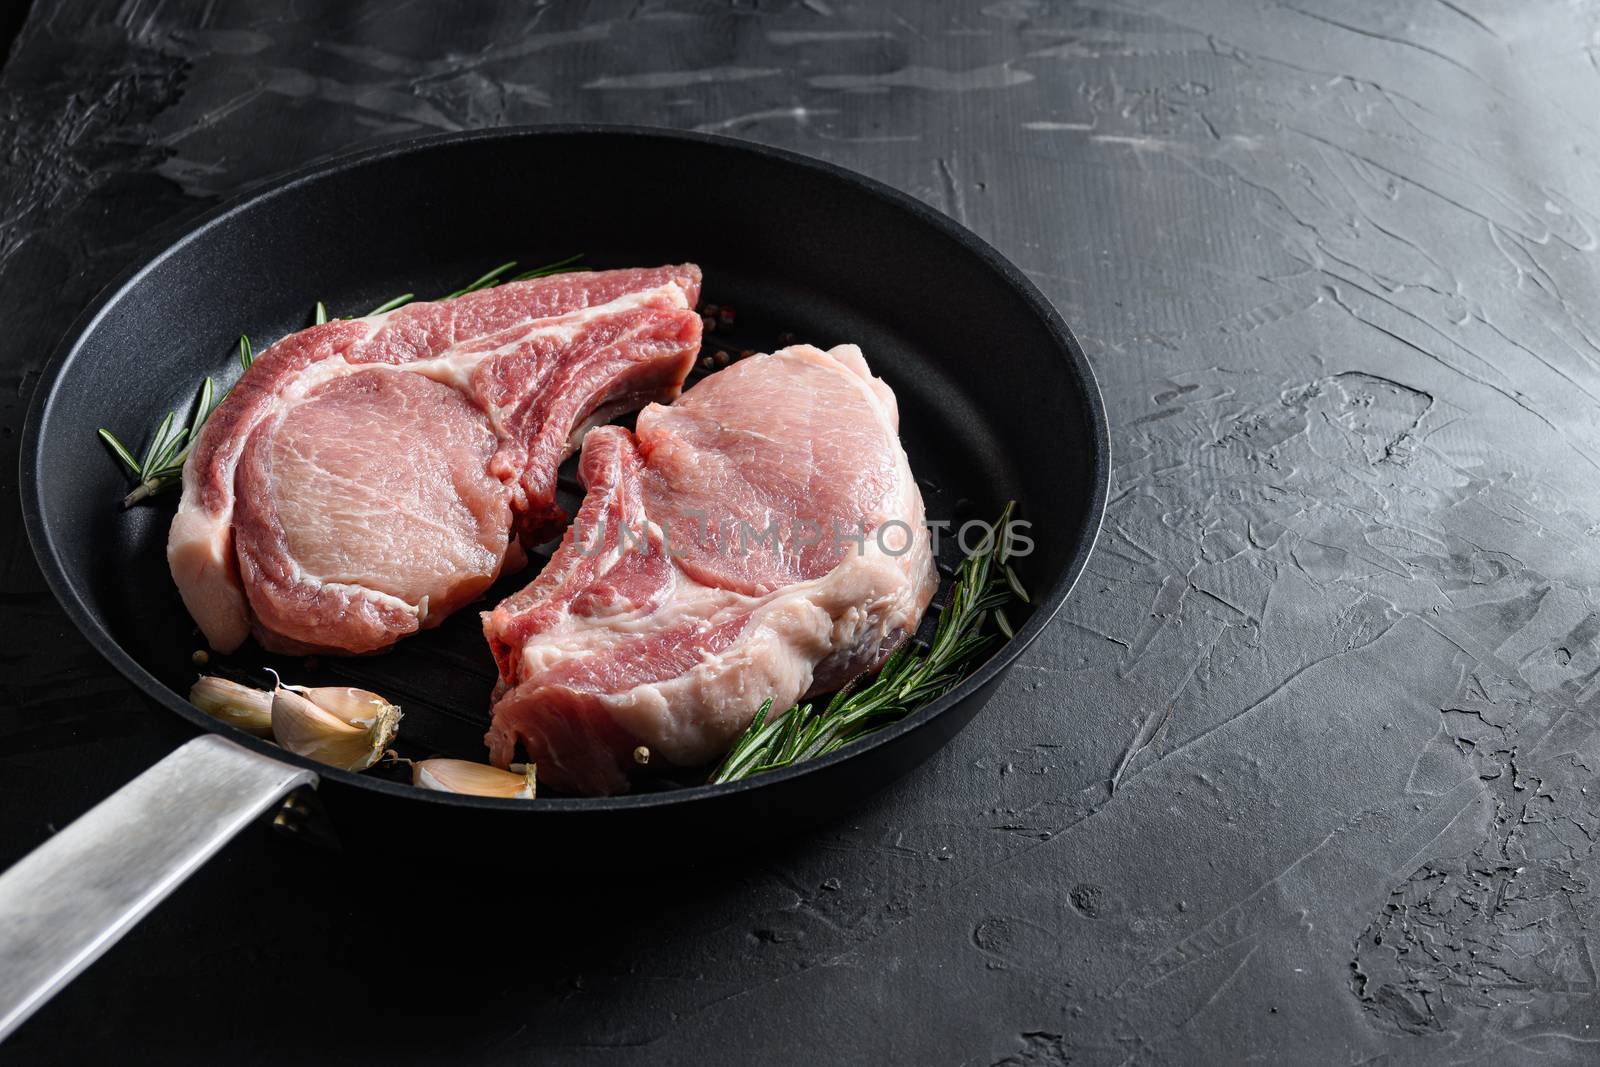 pork rib chops in frying pan grill skillet with herbs, spices side view black stone bakground space for text vertical.